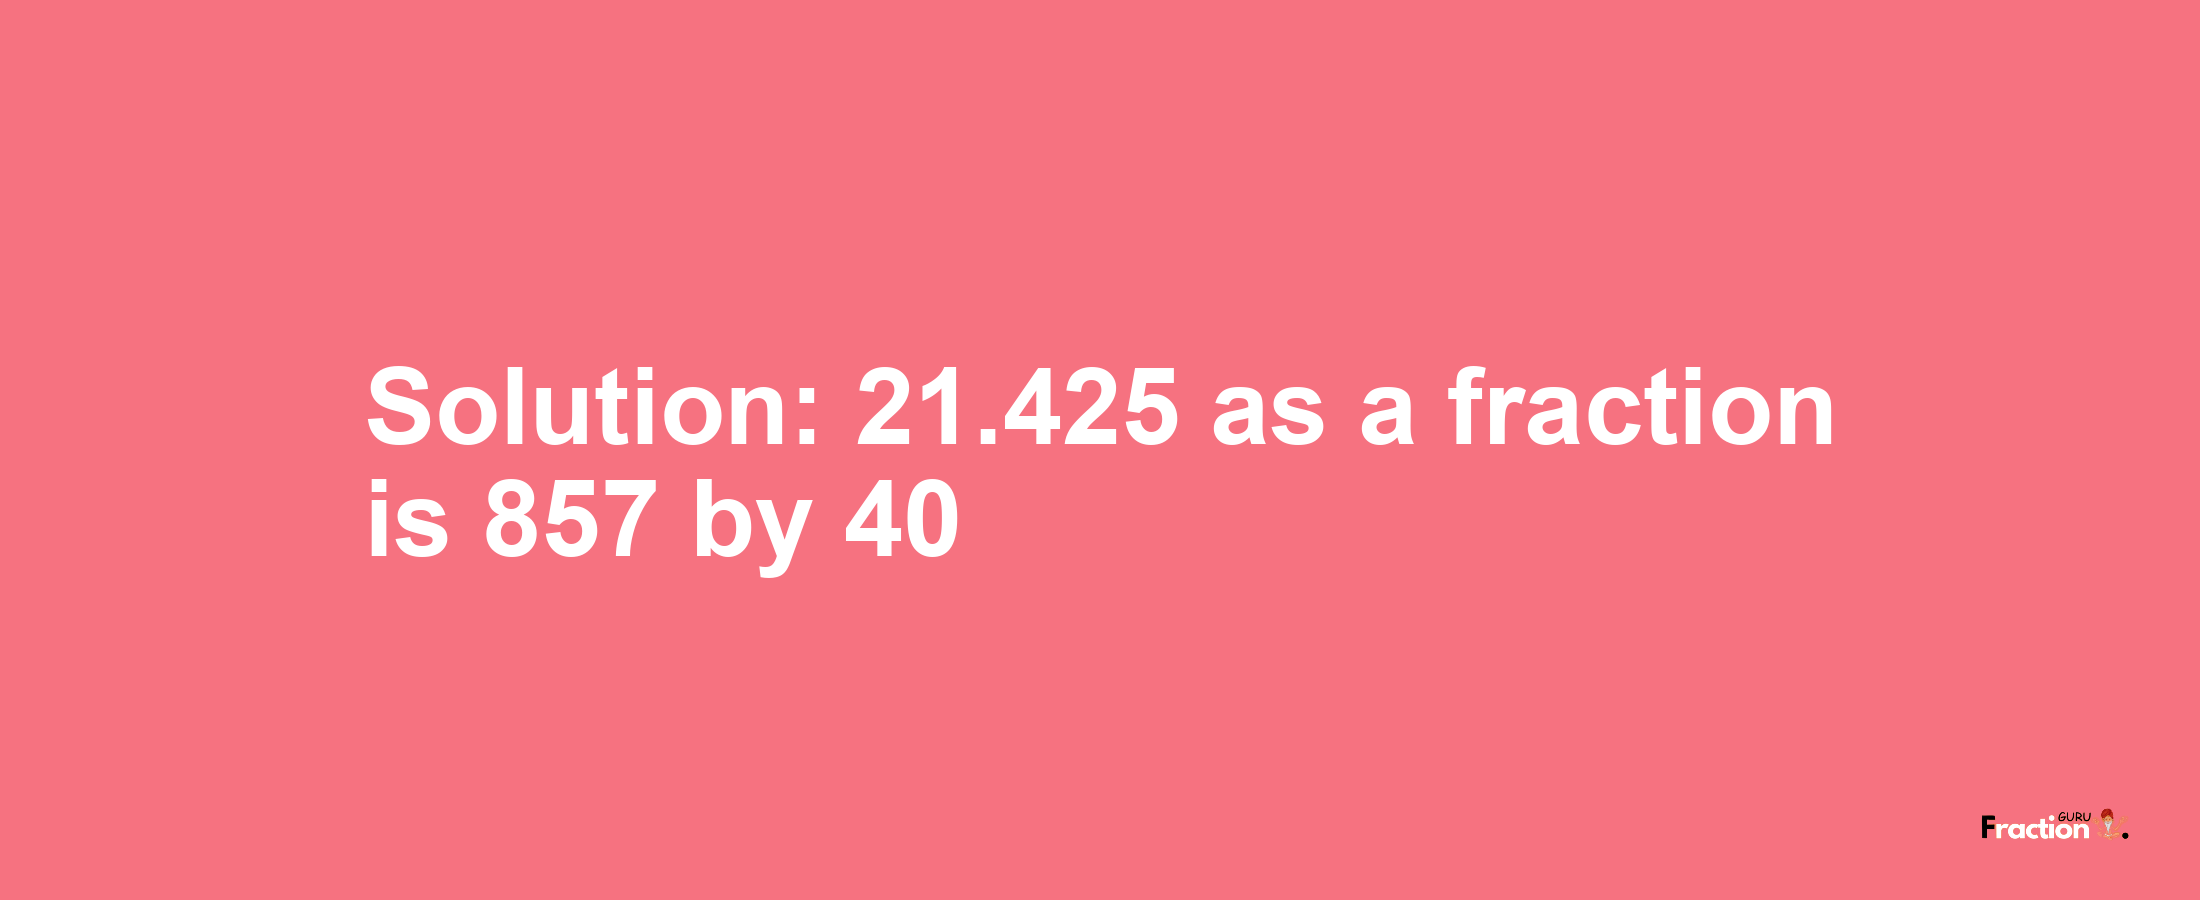 Solution:21.425 as a fraction is 857/40